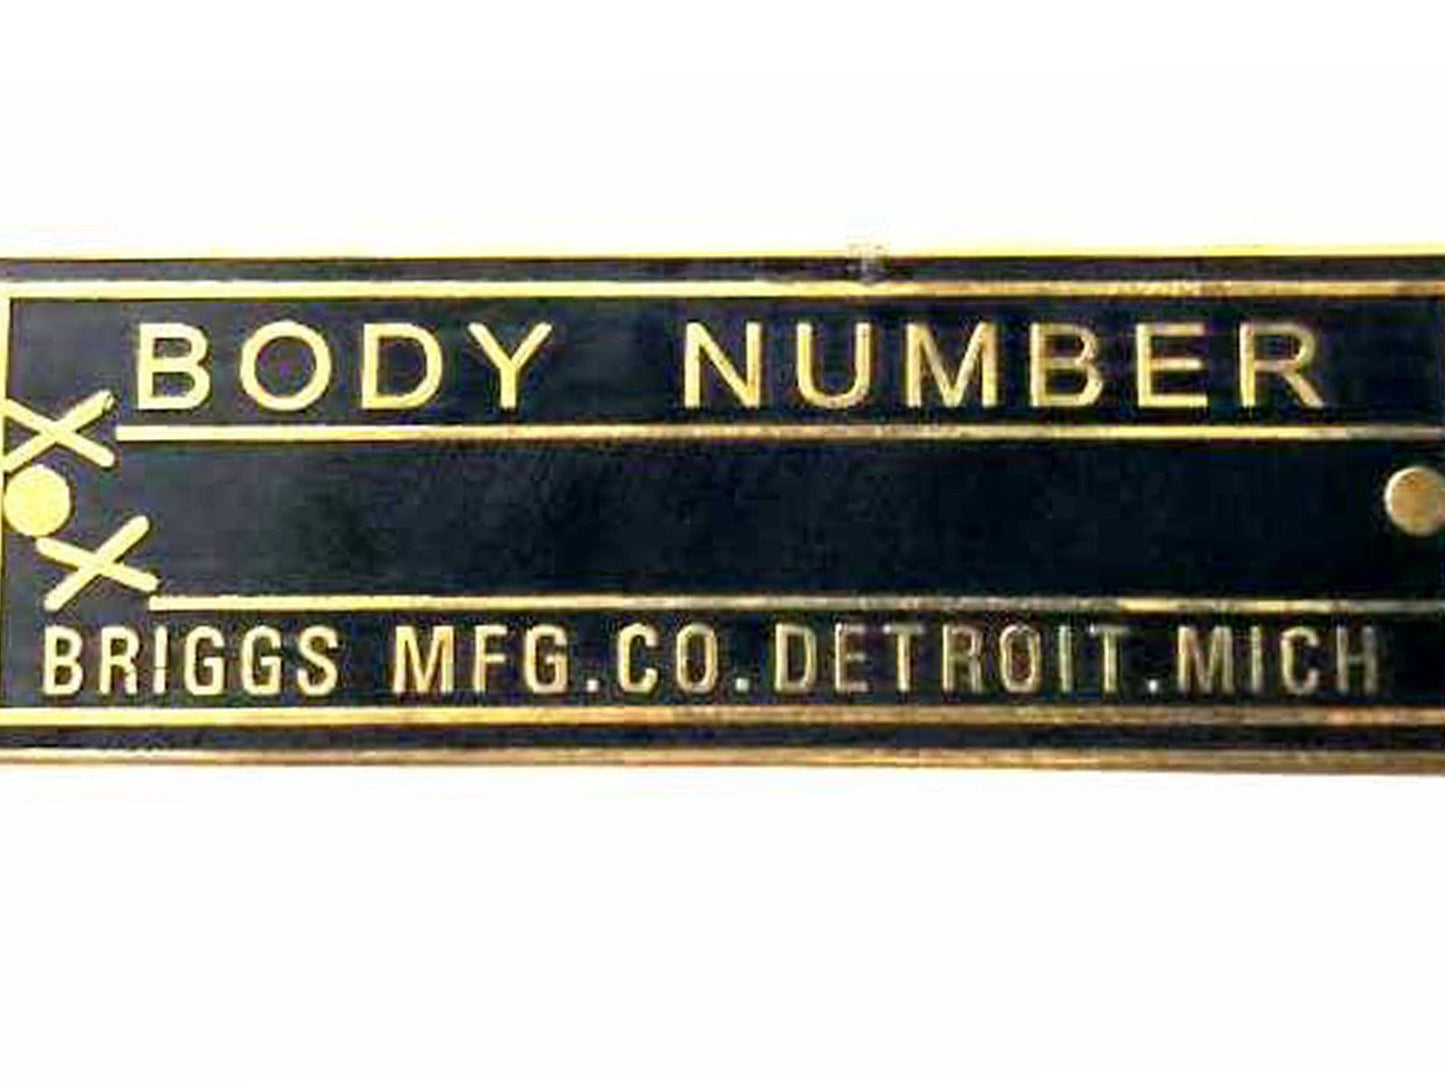 Body Number Black & Brass Briggs Acid Etched Data Plate Detroit, Mich Id Tag